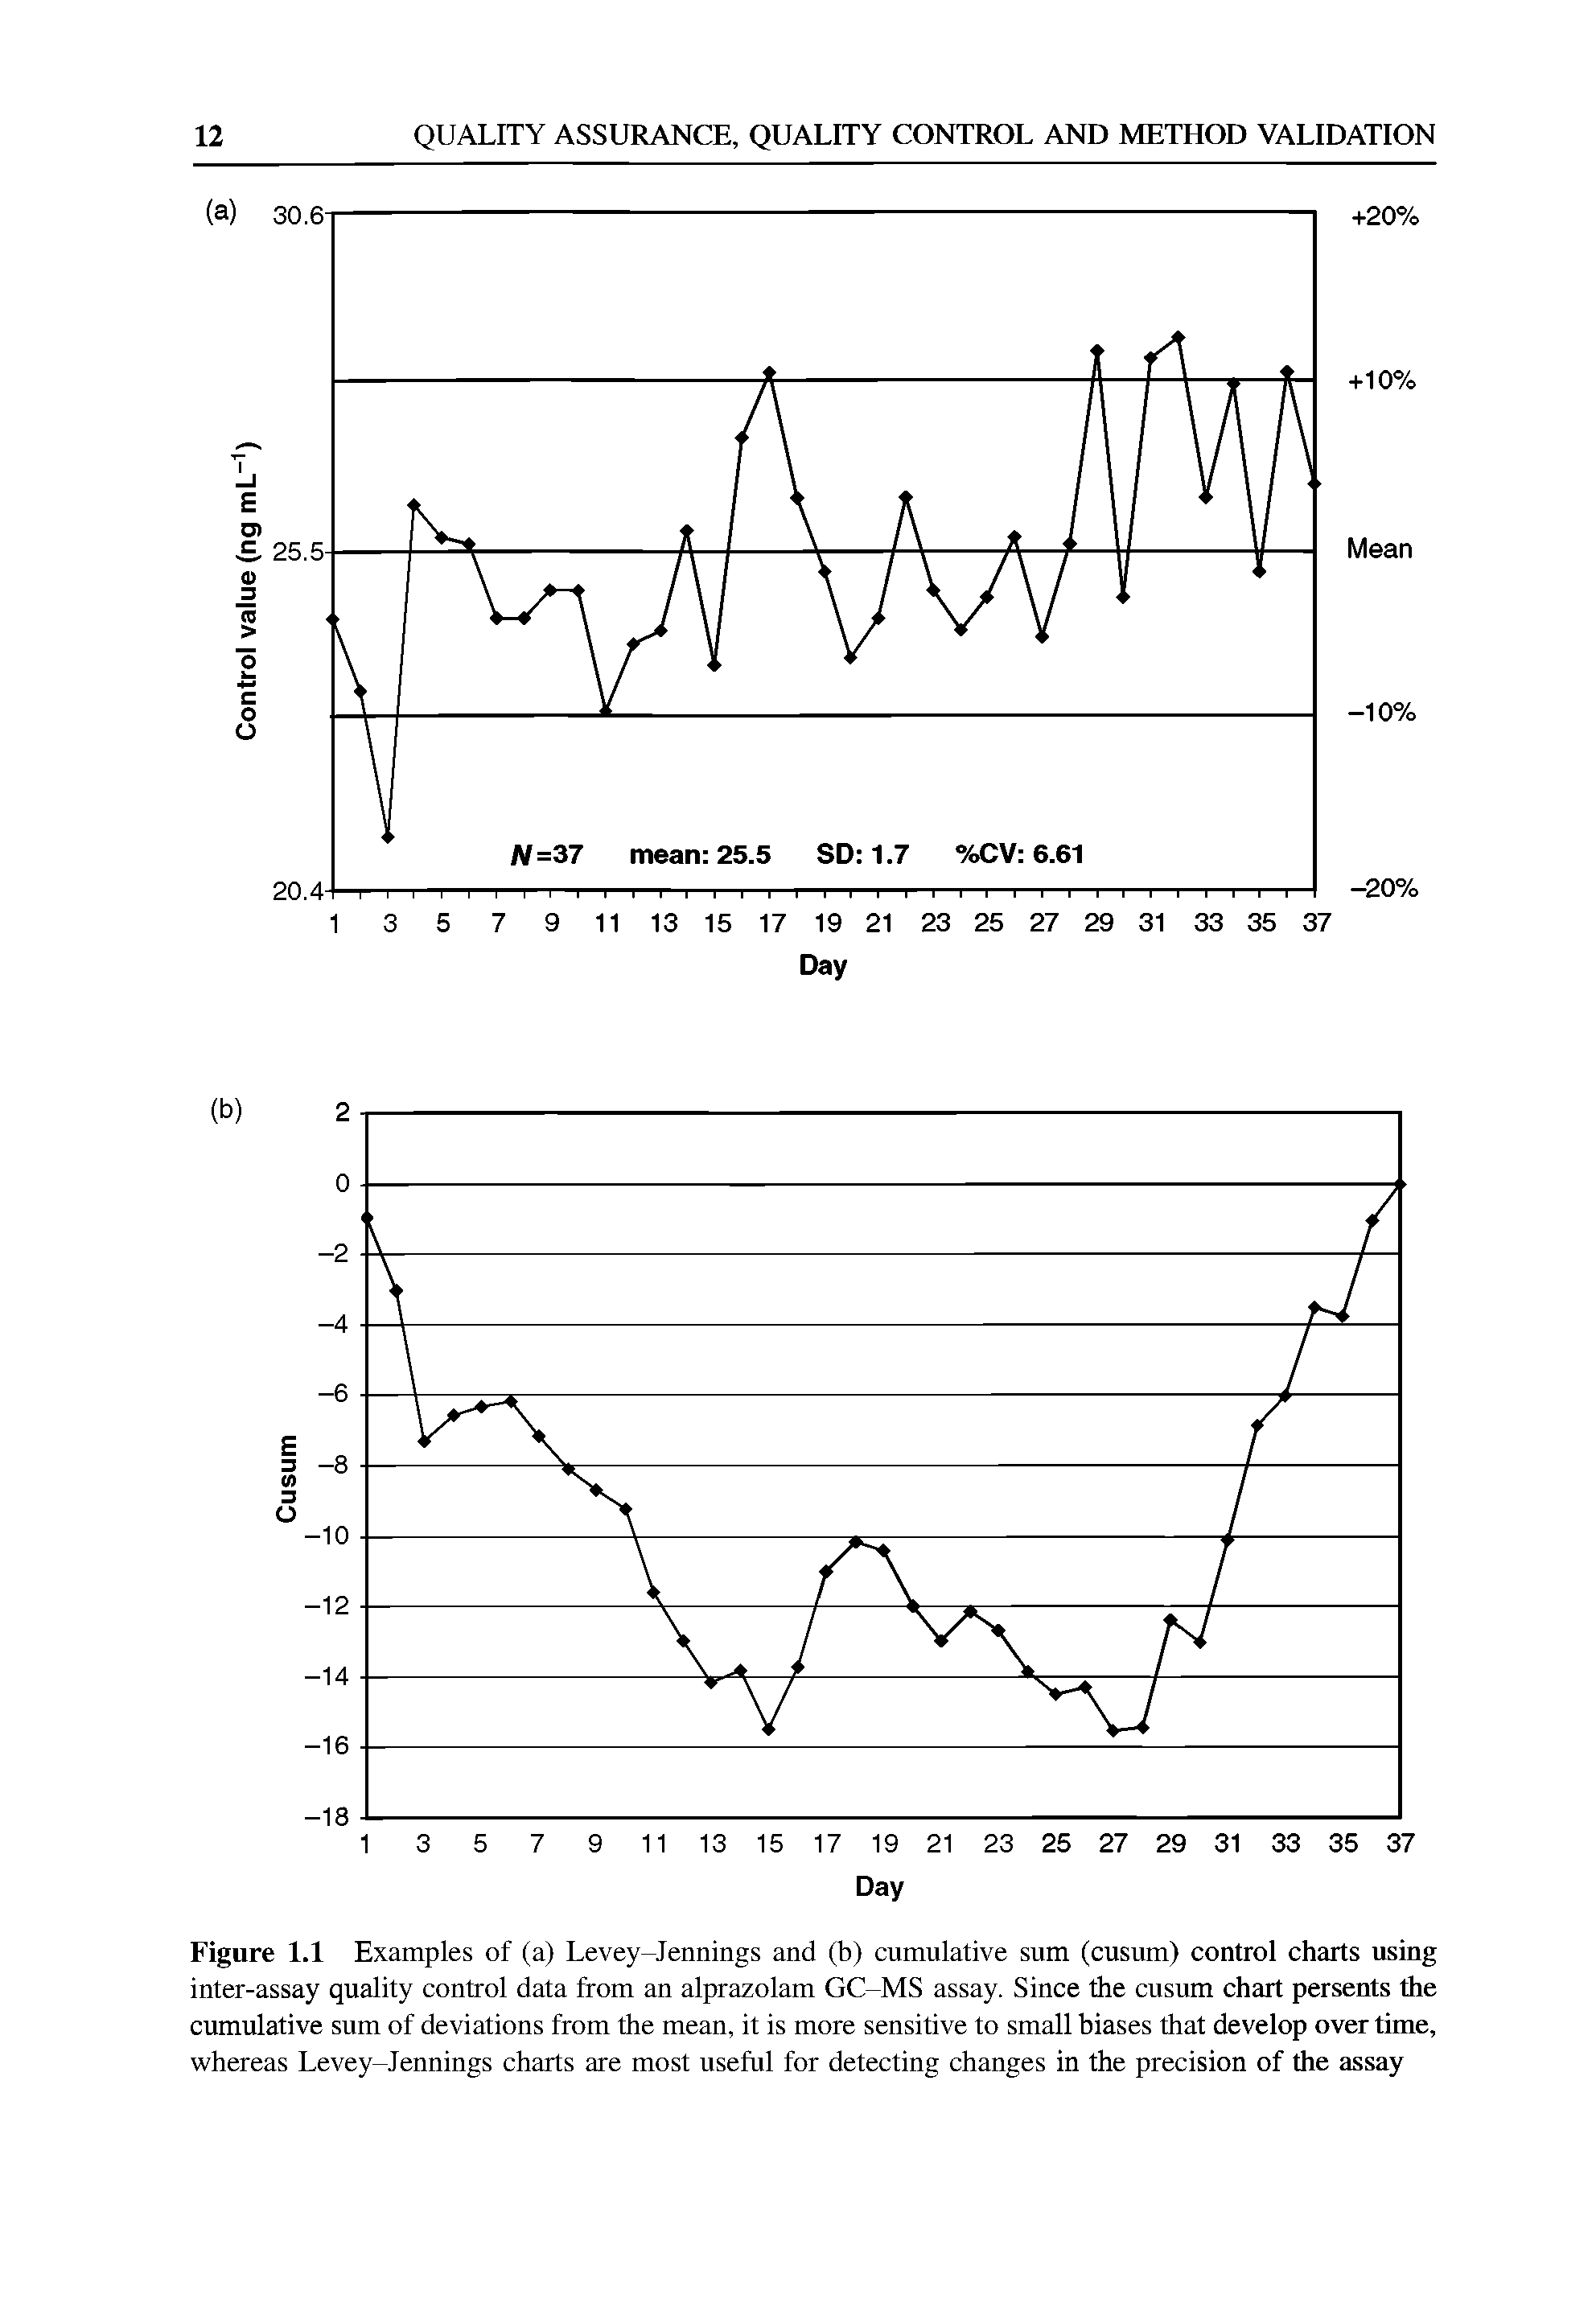 Figure 1.1 Examples of (a) Levey-Jennings and (b) cumulative sum (cusum) control charts using inter-assay quality control data from an alprazolam GC-MS assay. Since the cusum chart persents the cumulative sum of deviations from the mean, it is more sensitive to small biases that develop over time, whereas Levey-Jennings charts are most useful for detecting changes in the precision of the assay...